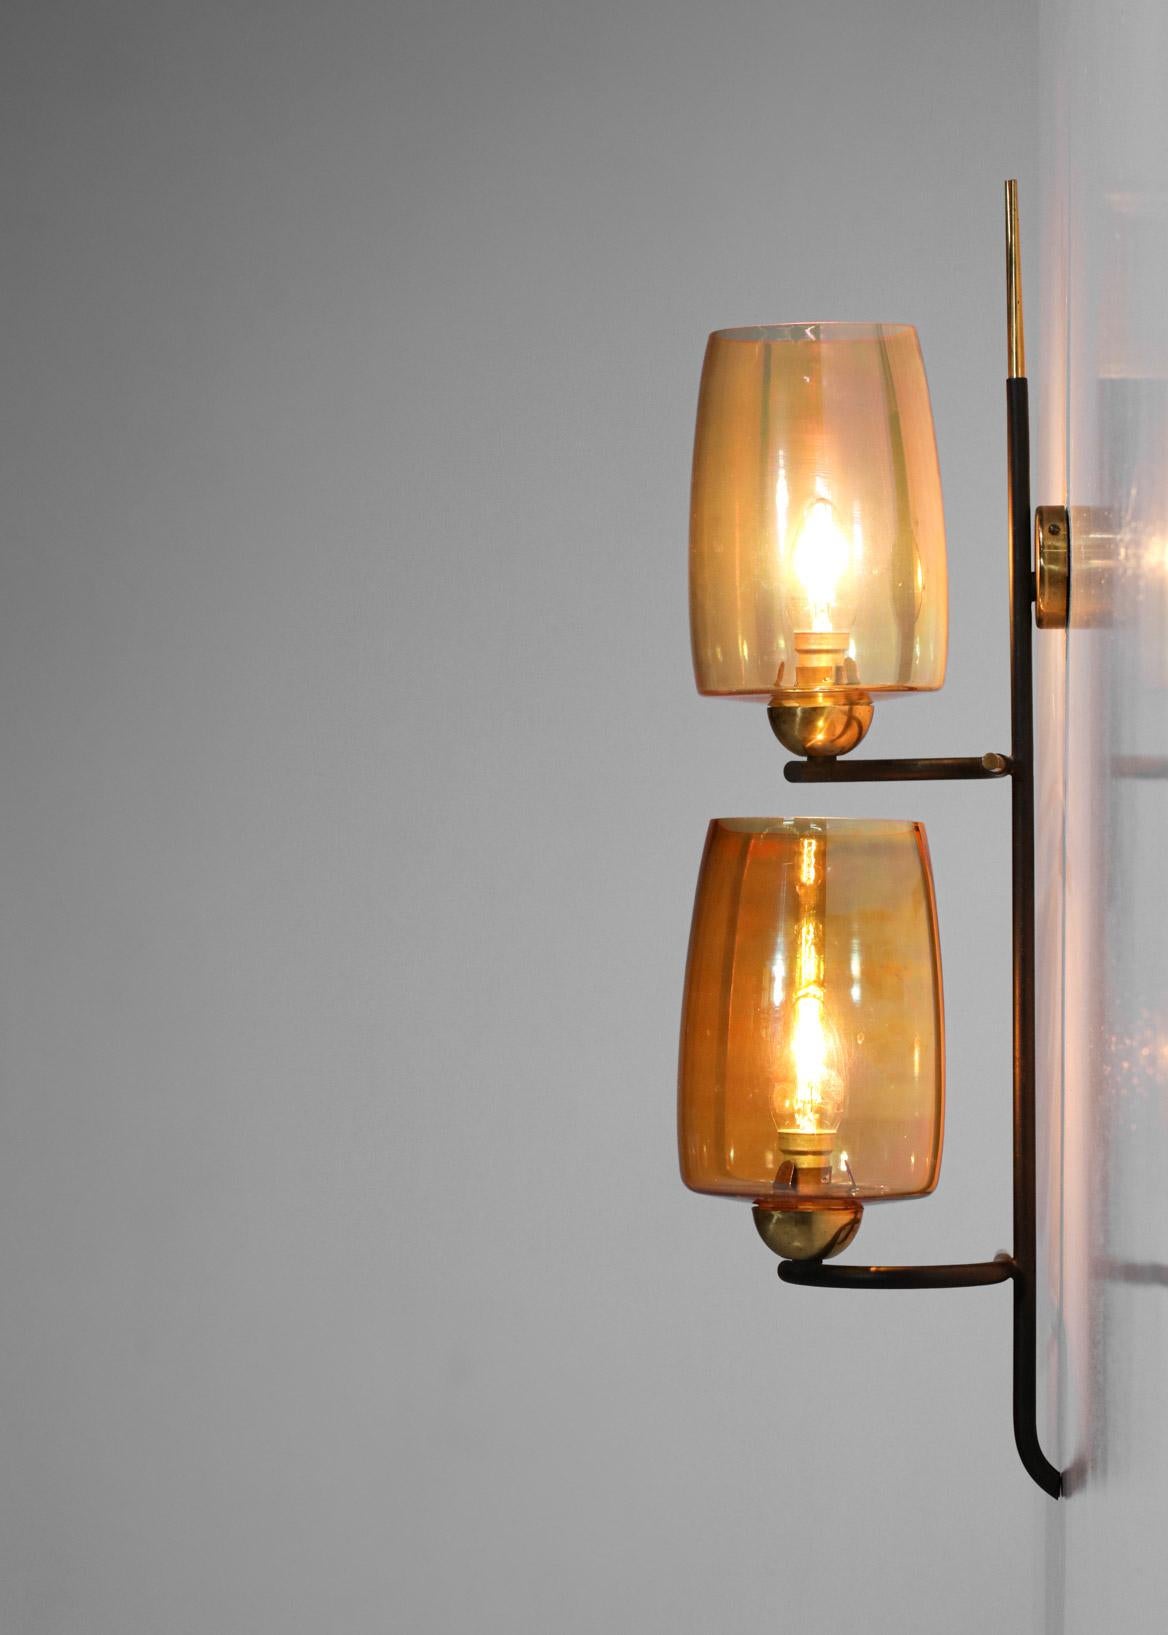 Mid-20th Century Pair of 50s/60s French Vintage Brass Orange Glass Sconces Wall Lights For Sale